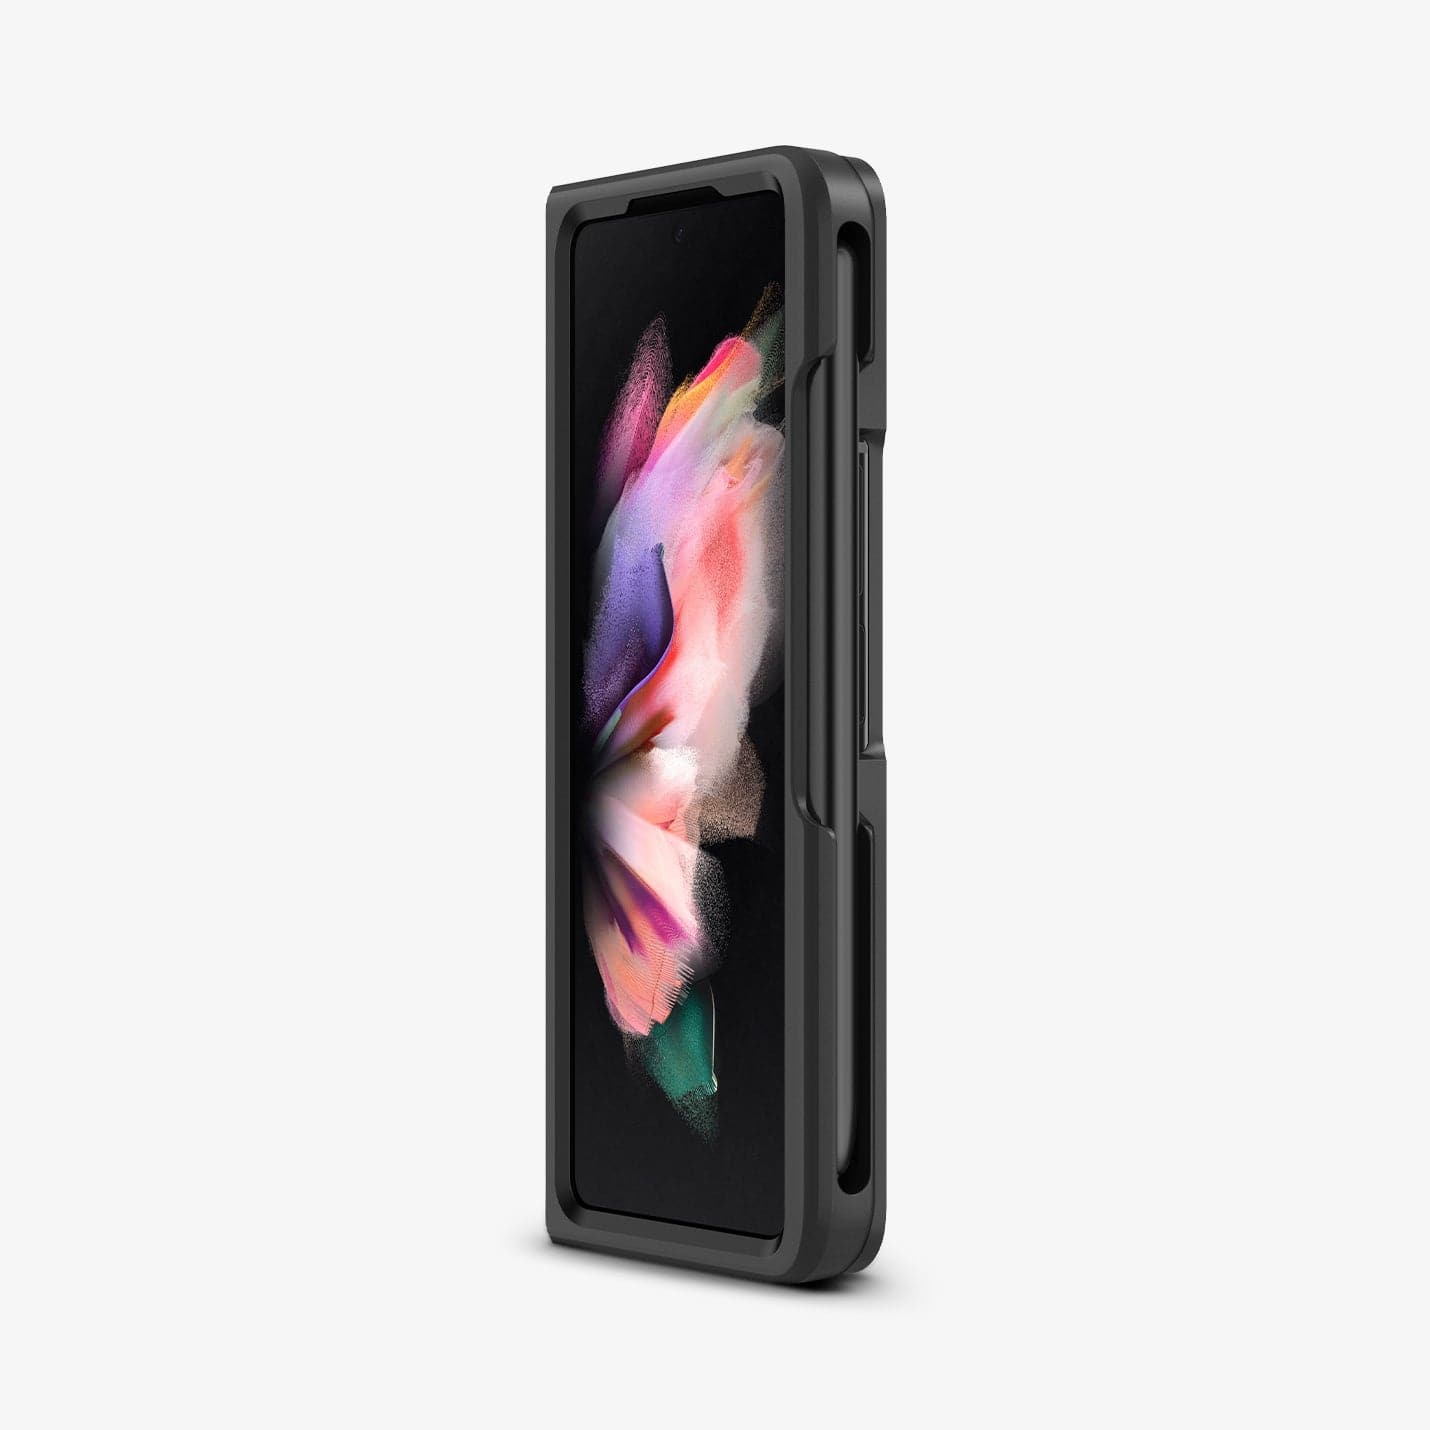 ACS03688 - Galaxy Z Fold 3 Case Thin Fit Pro in black showing the front and partial side